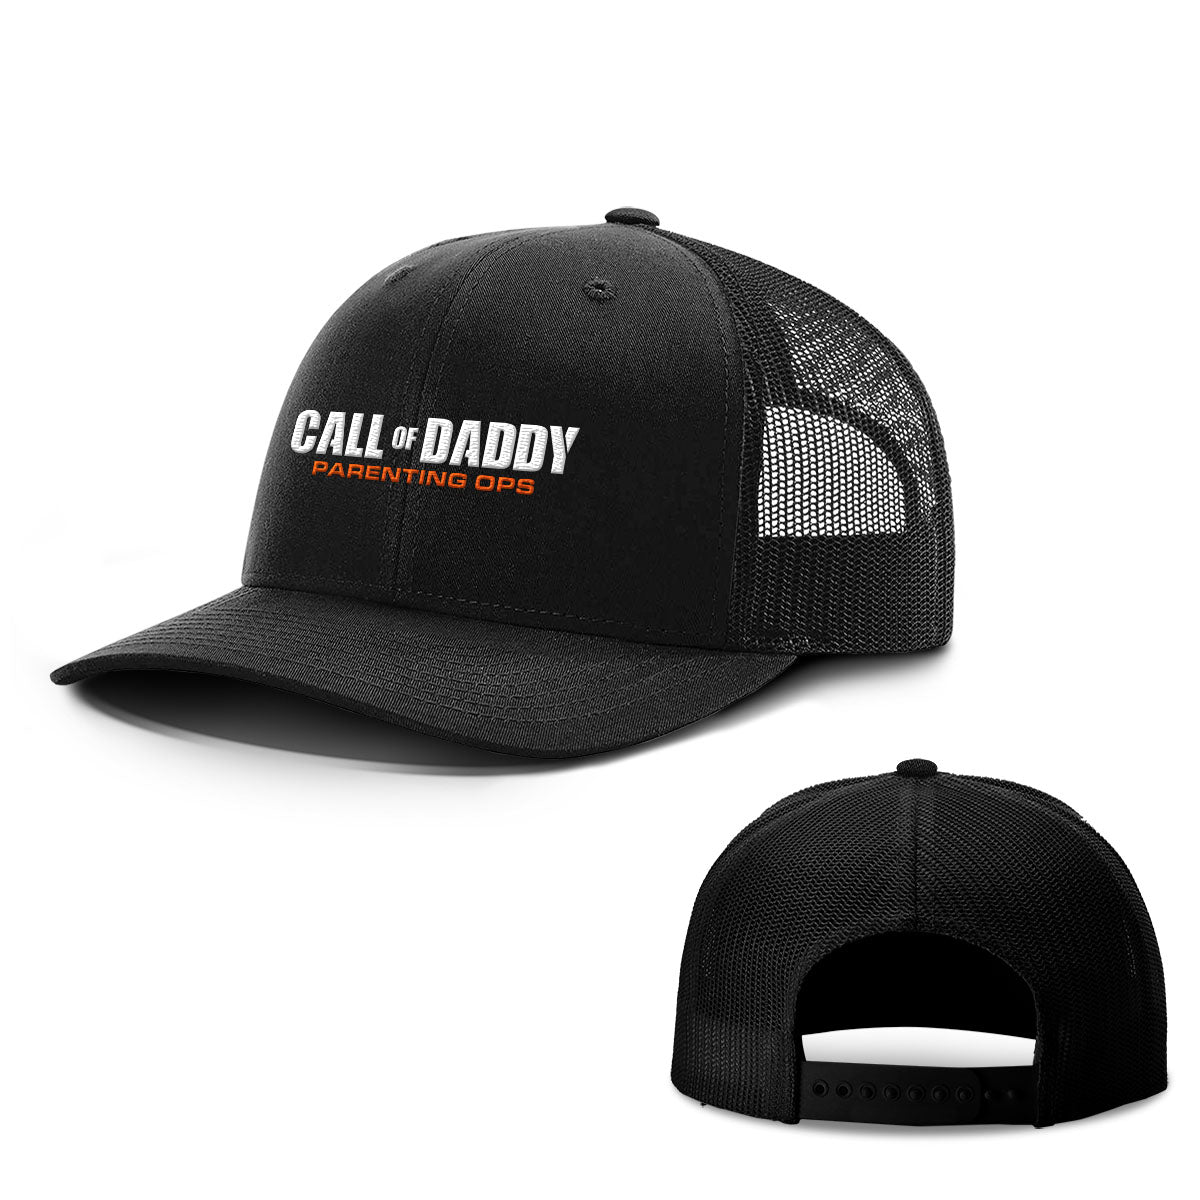 Call Of Daddy Hats - BustedTees.com